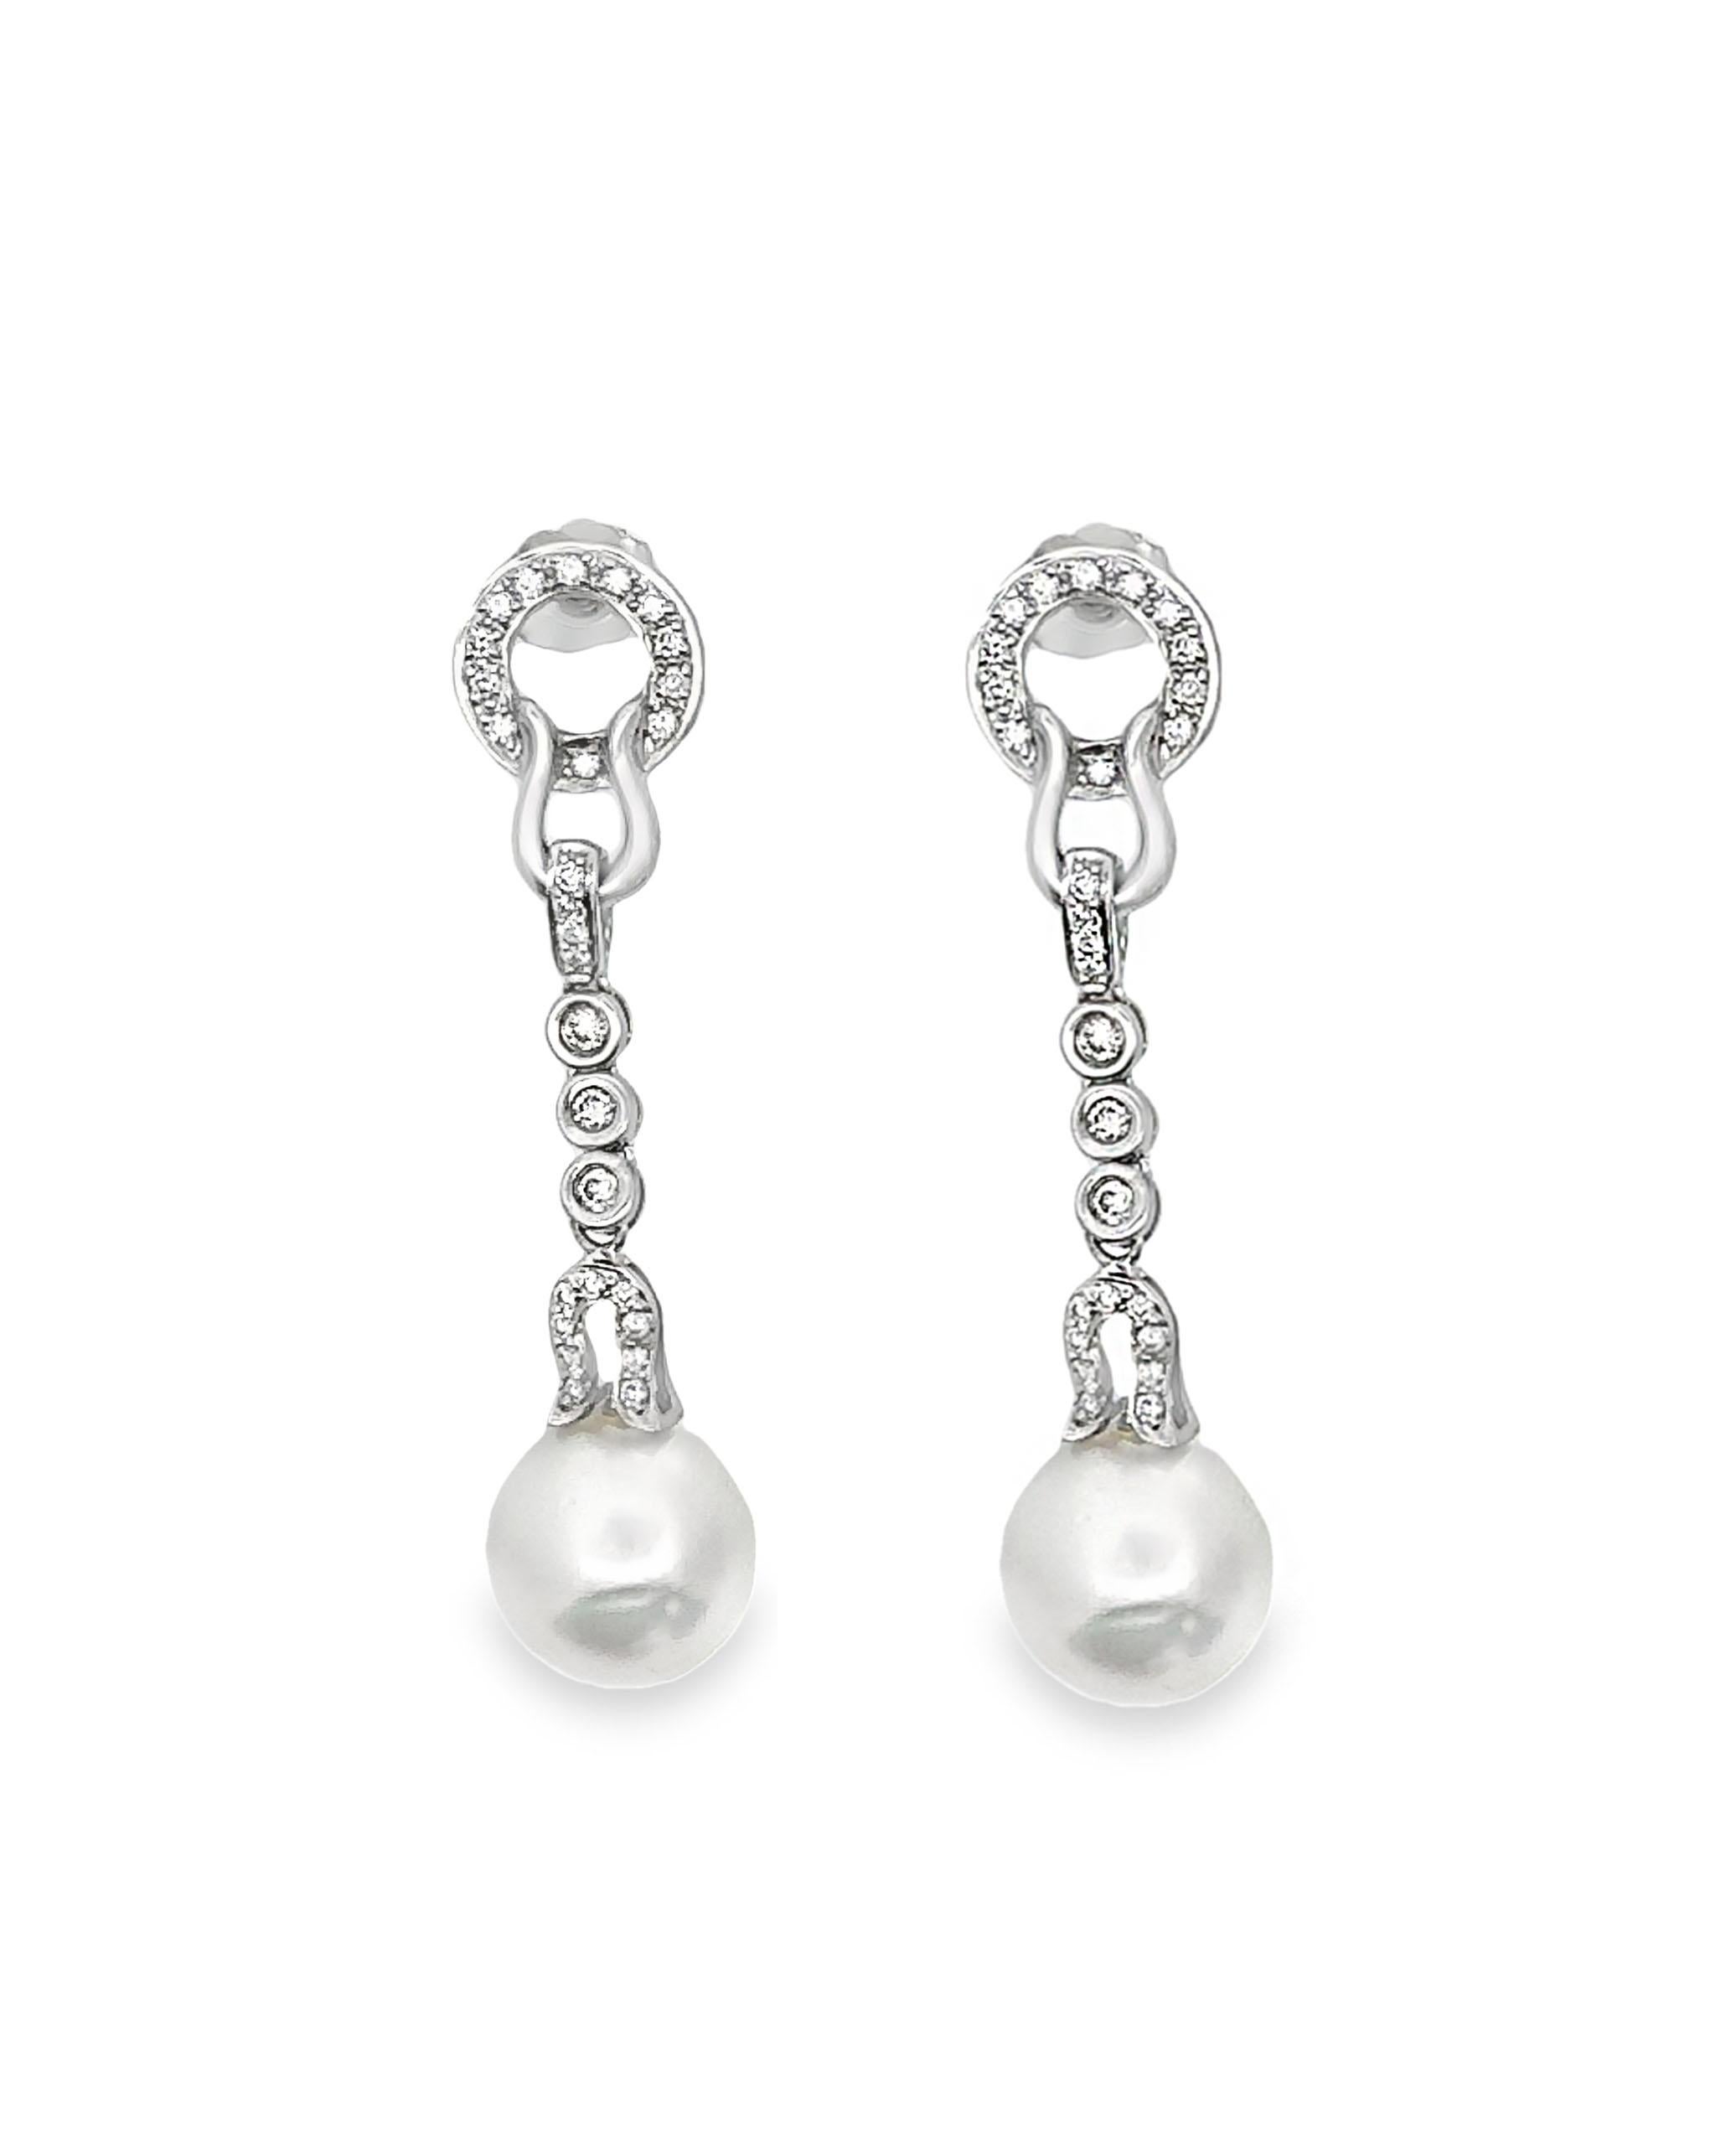 Contemporary 14K White Gold Long Earrings with South Sea Pearls and Diamonds